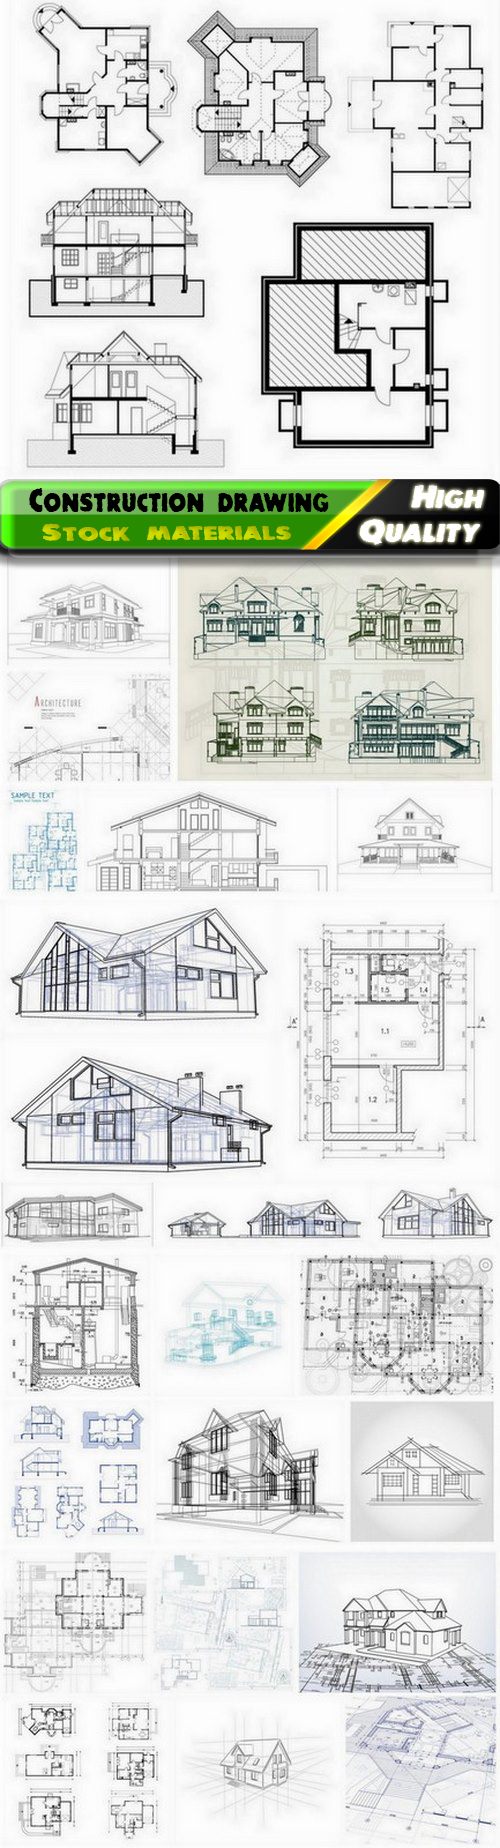 Construction drawing and architecture blueprint of house building - 25 Eps